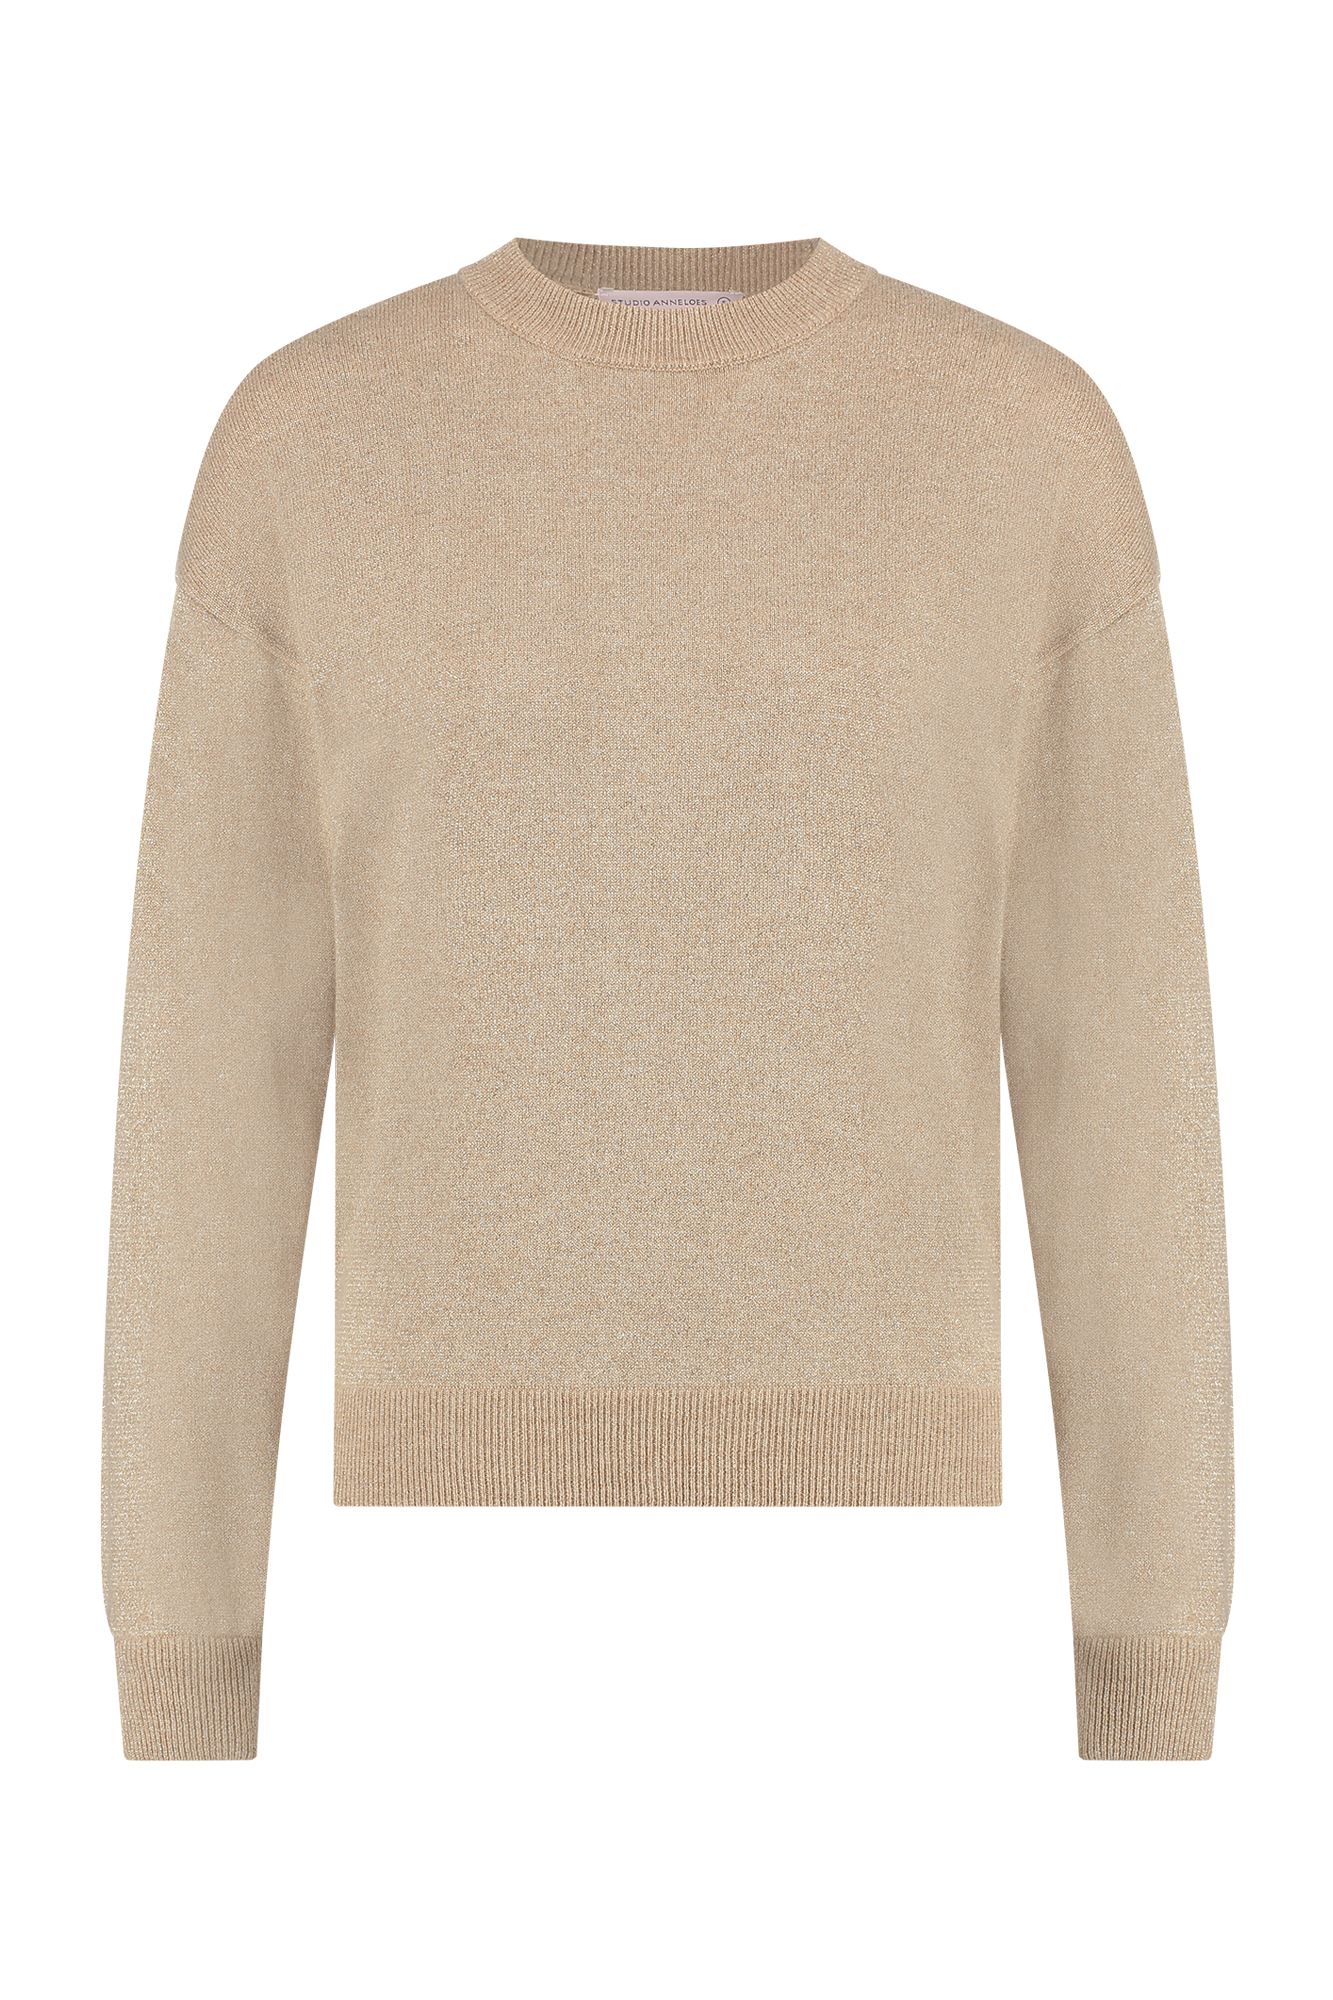 Studio Anneloes Cady Lurex Cashmere Taupe